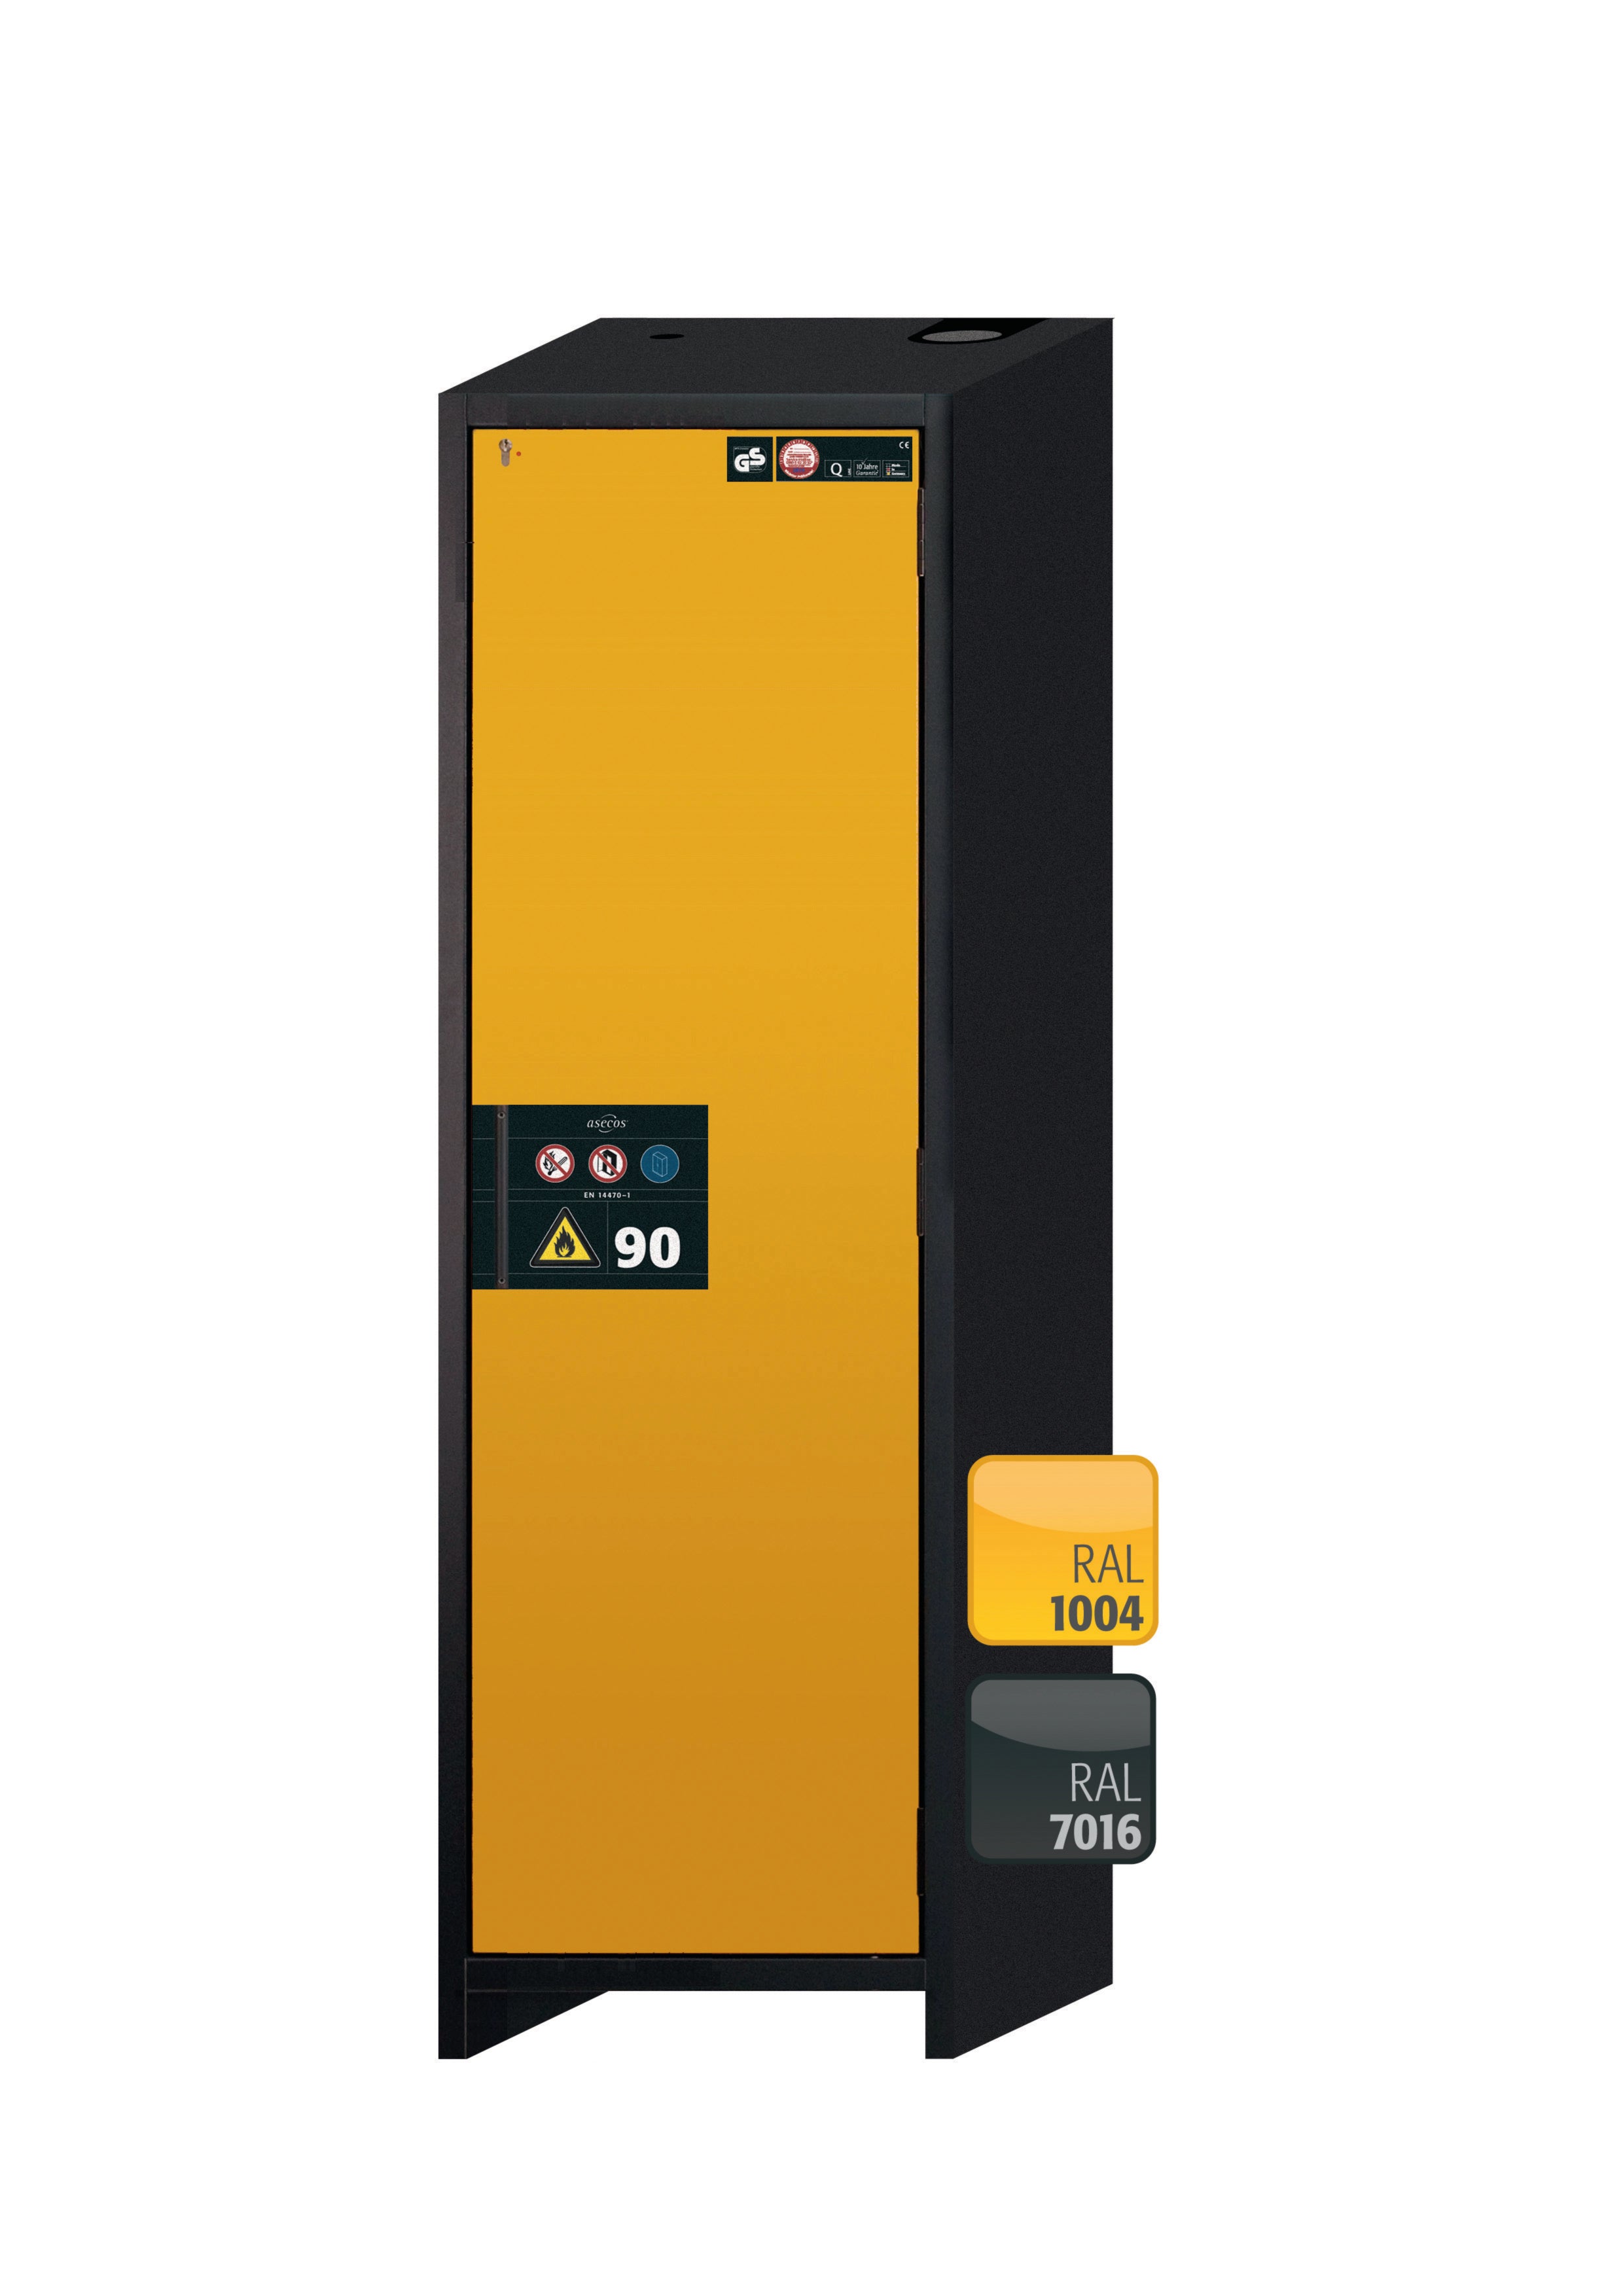 Type 90 safety storage cabinet Q-PEGASUS-90 model Q90.195.060.WDACR in warning yellow RAL 1004 with 2x tray shelf (standard) (stainless steel 1.4301),